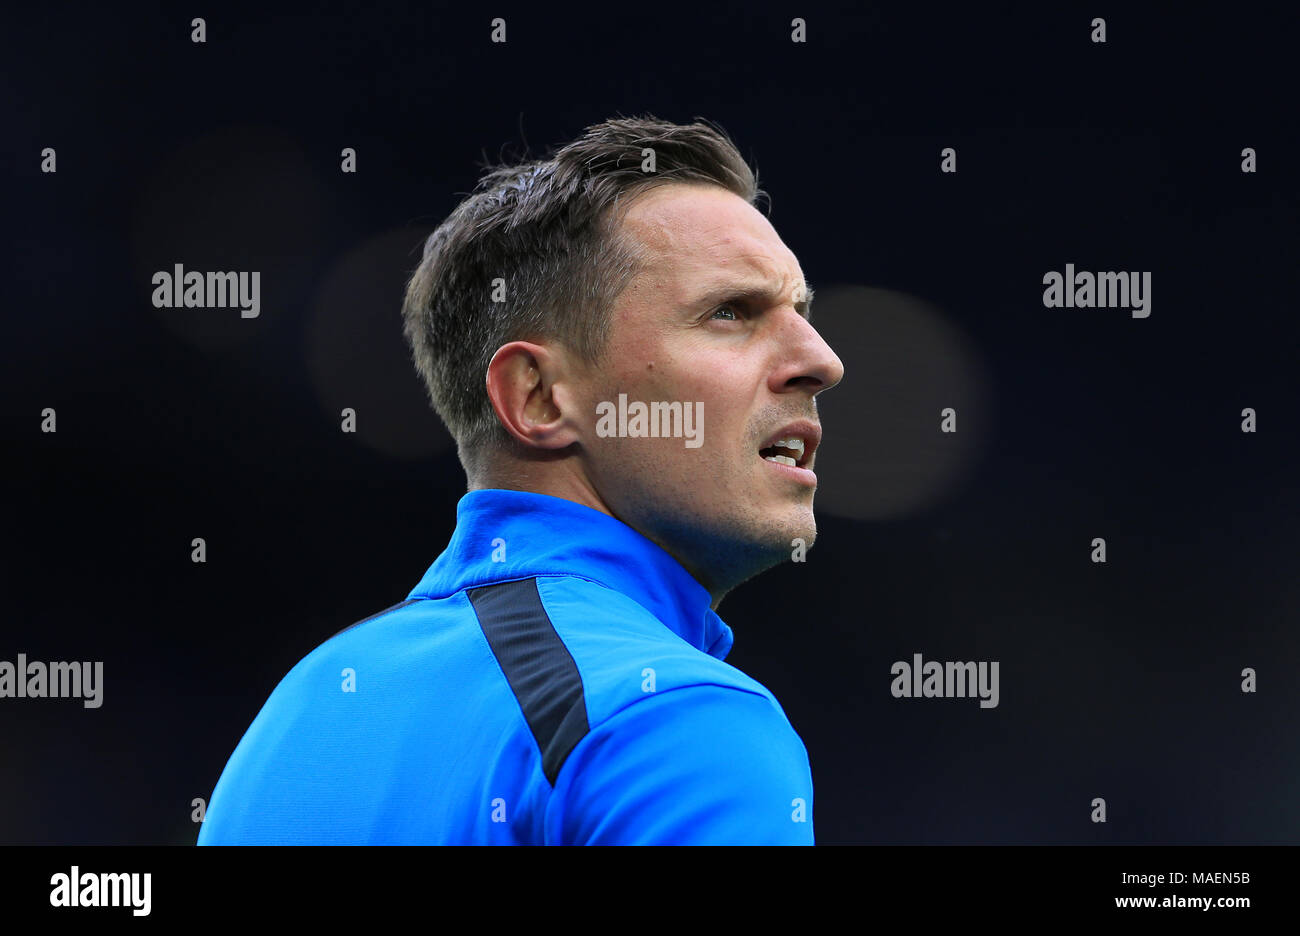 Everton's Phil Jagielka before the Premier League match at Goodison Park, Liverpool. PRESS ASSOCIATION Photo. Picture date: Saturday March 31, 2018. See PA story soccer Everton. Photo credit should read: Tim Goode/PA Wire Stock Photo